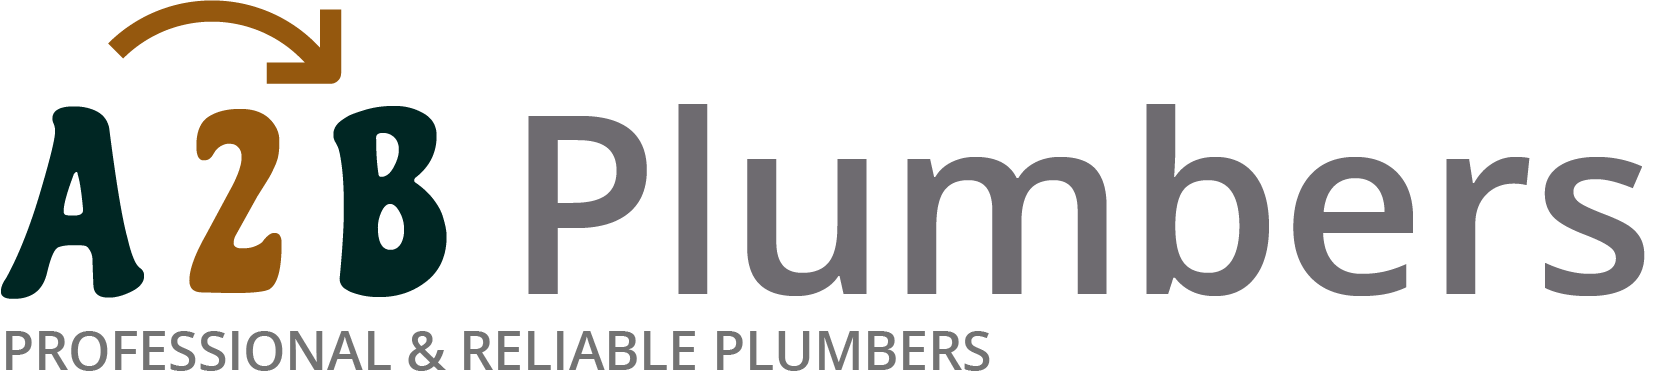 If you need a boiler installed, a radiator repaired or a leaking tap fixed, call us now - we provide services for properties in Bournemouth and the local area.